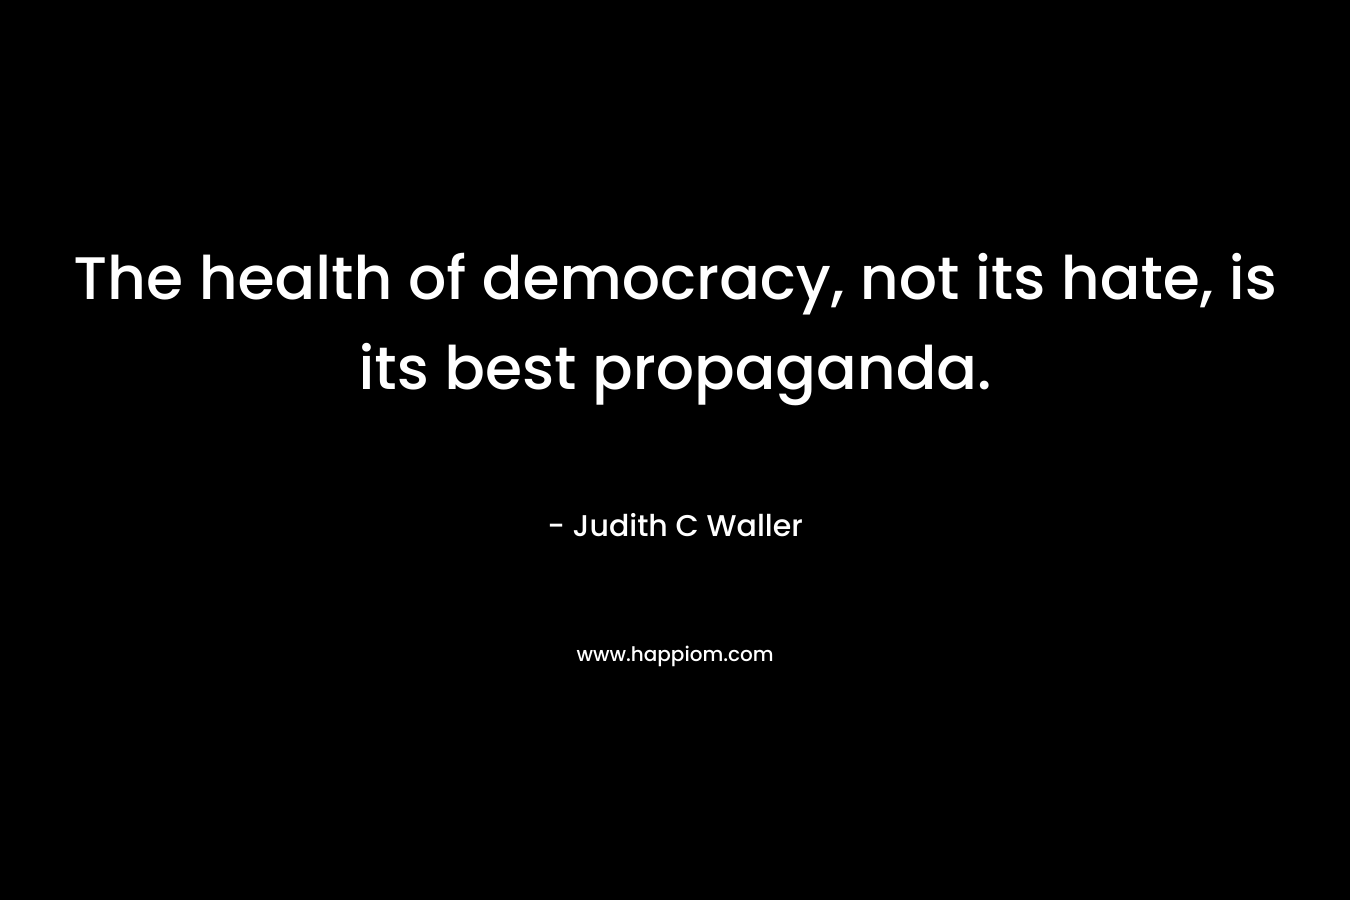 The health of democracy, not its hate, is its best propaganda. – Judith C Waller